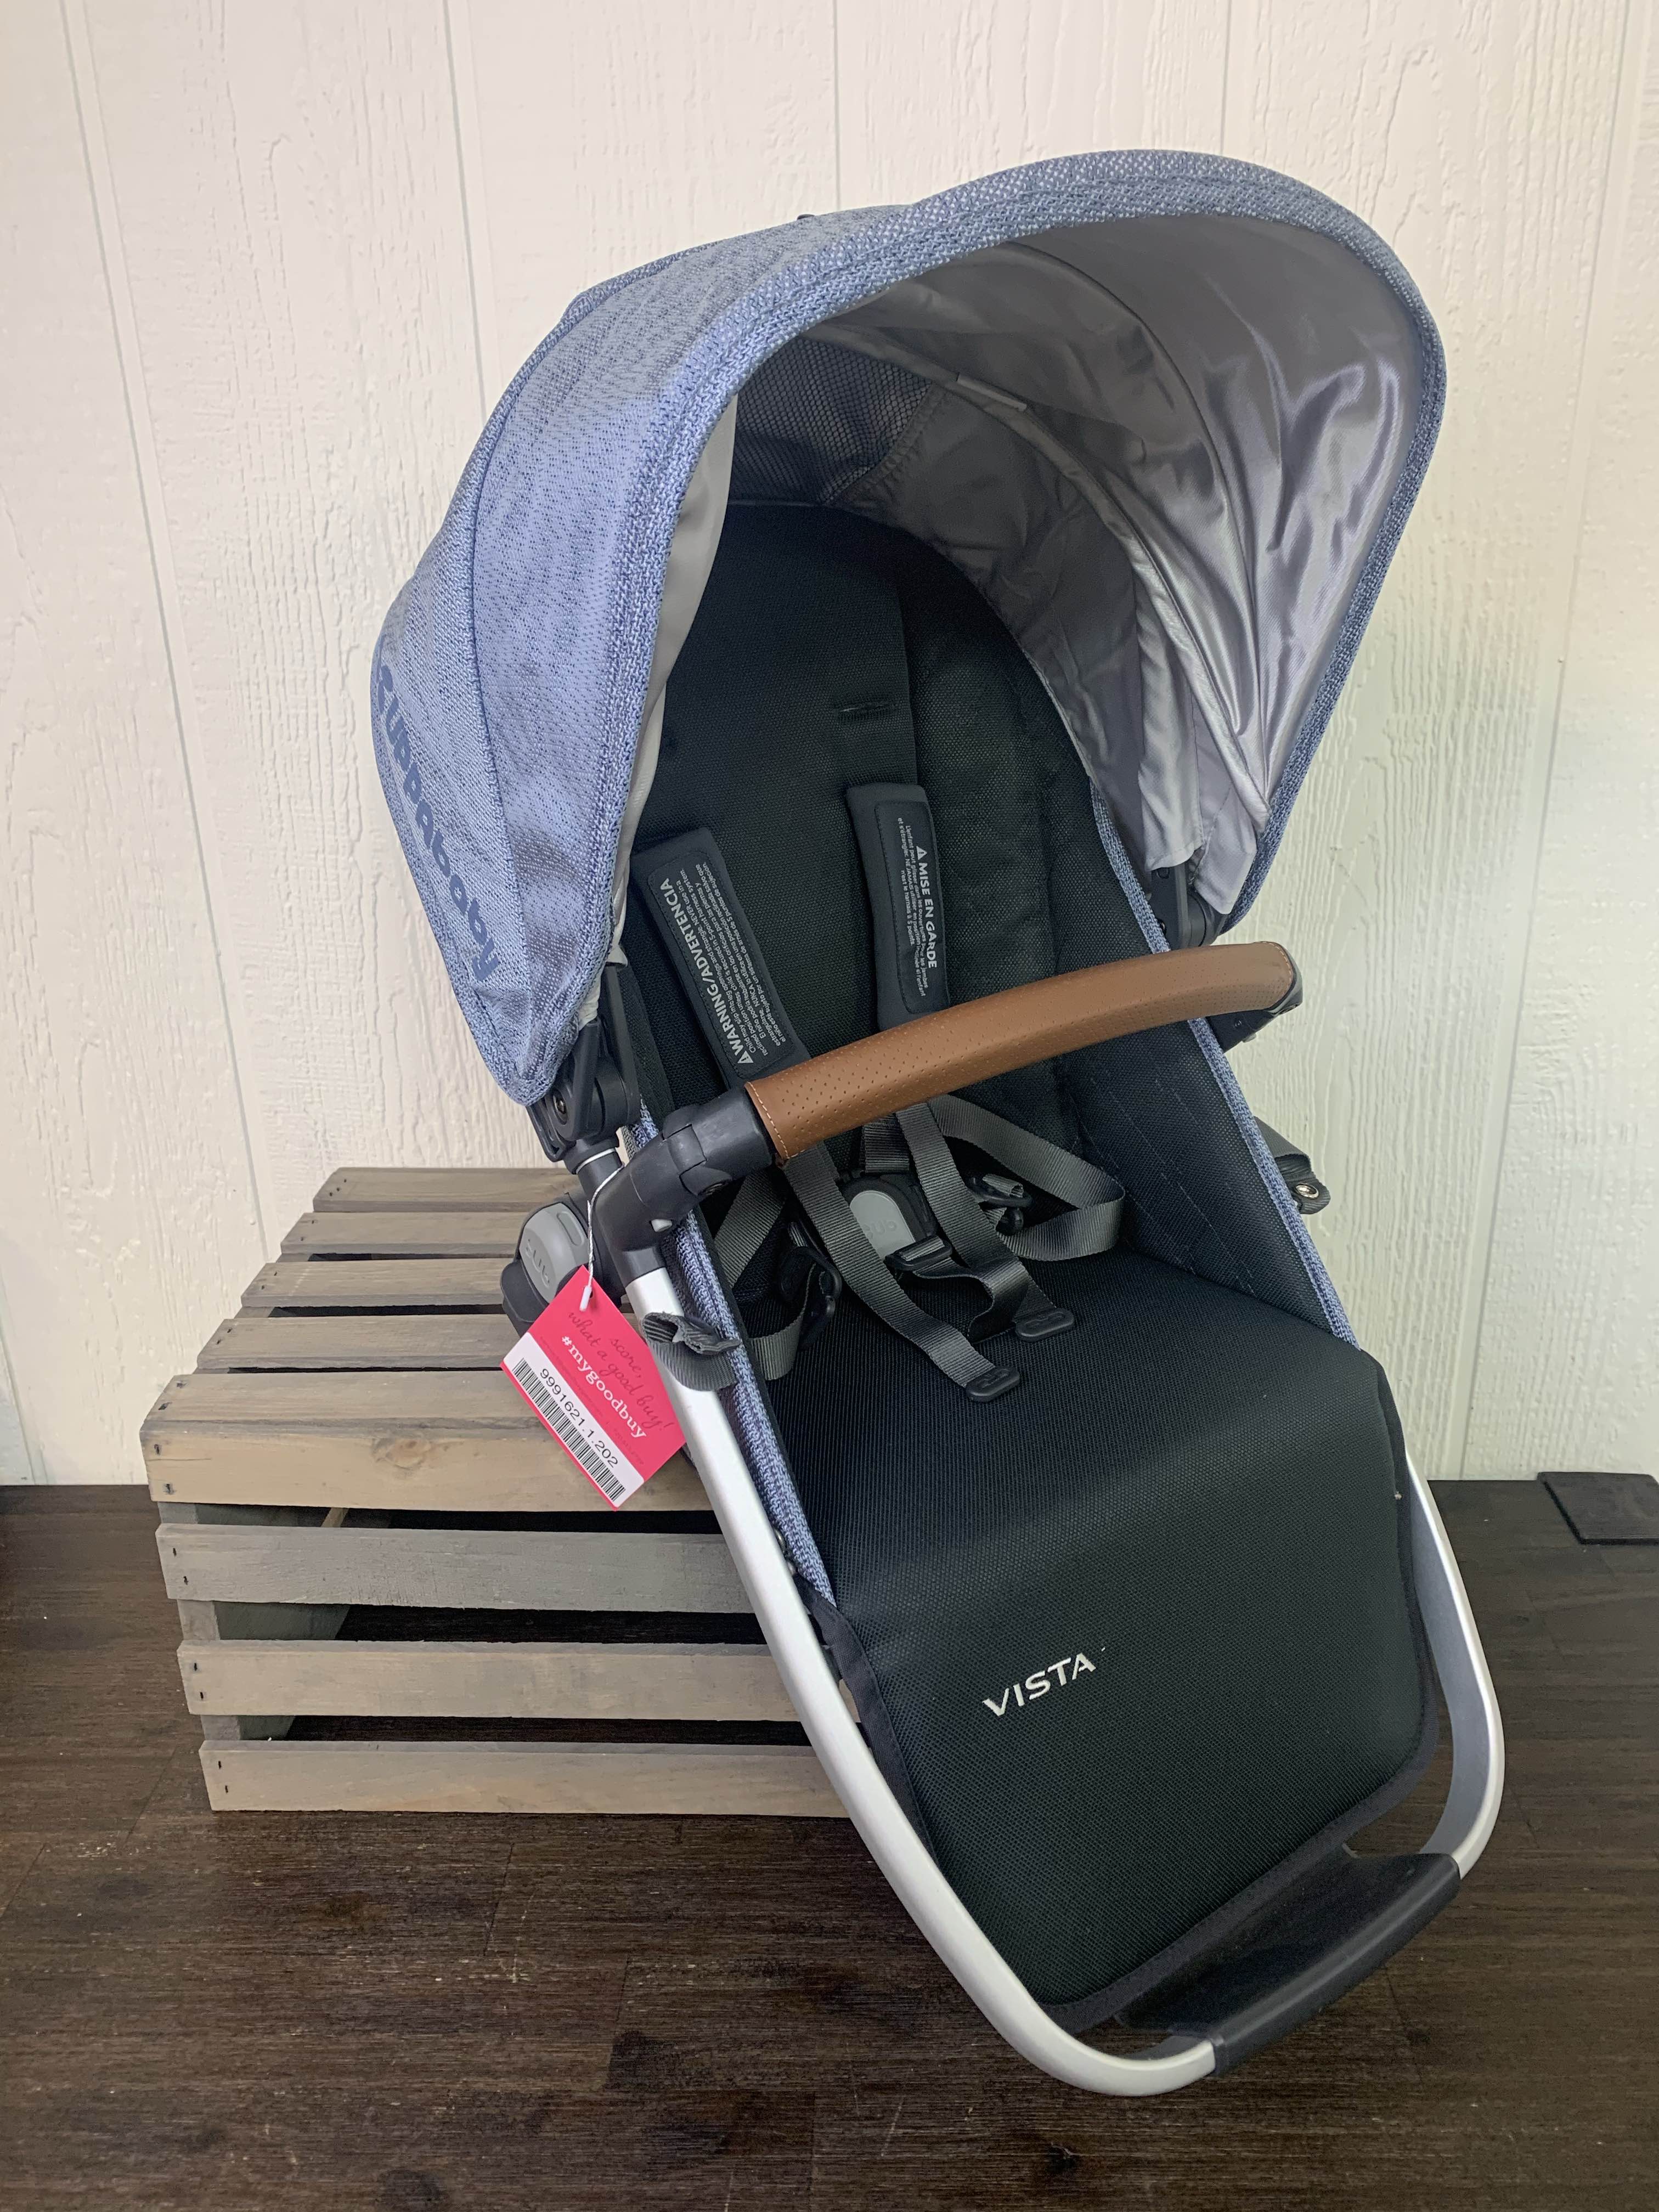 uppababy vista rumble seat henry